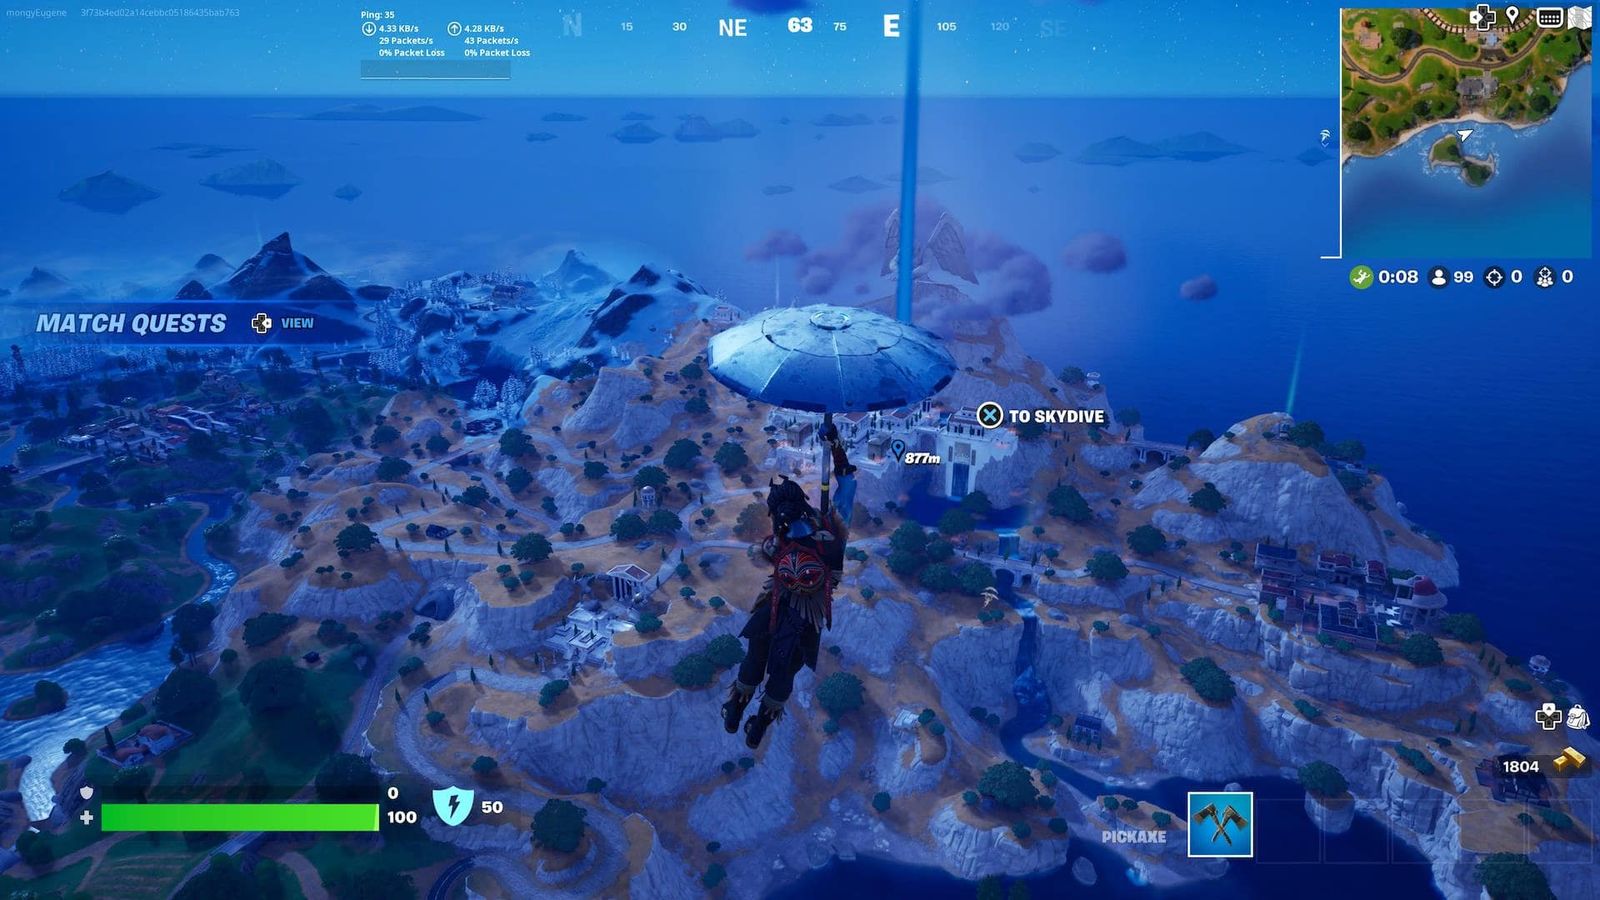 Dropping onto the map in Fortnite 